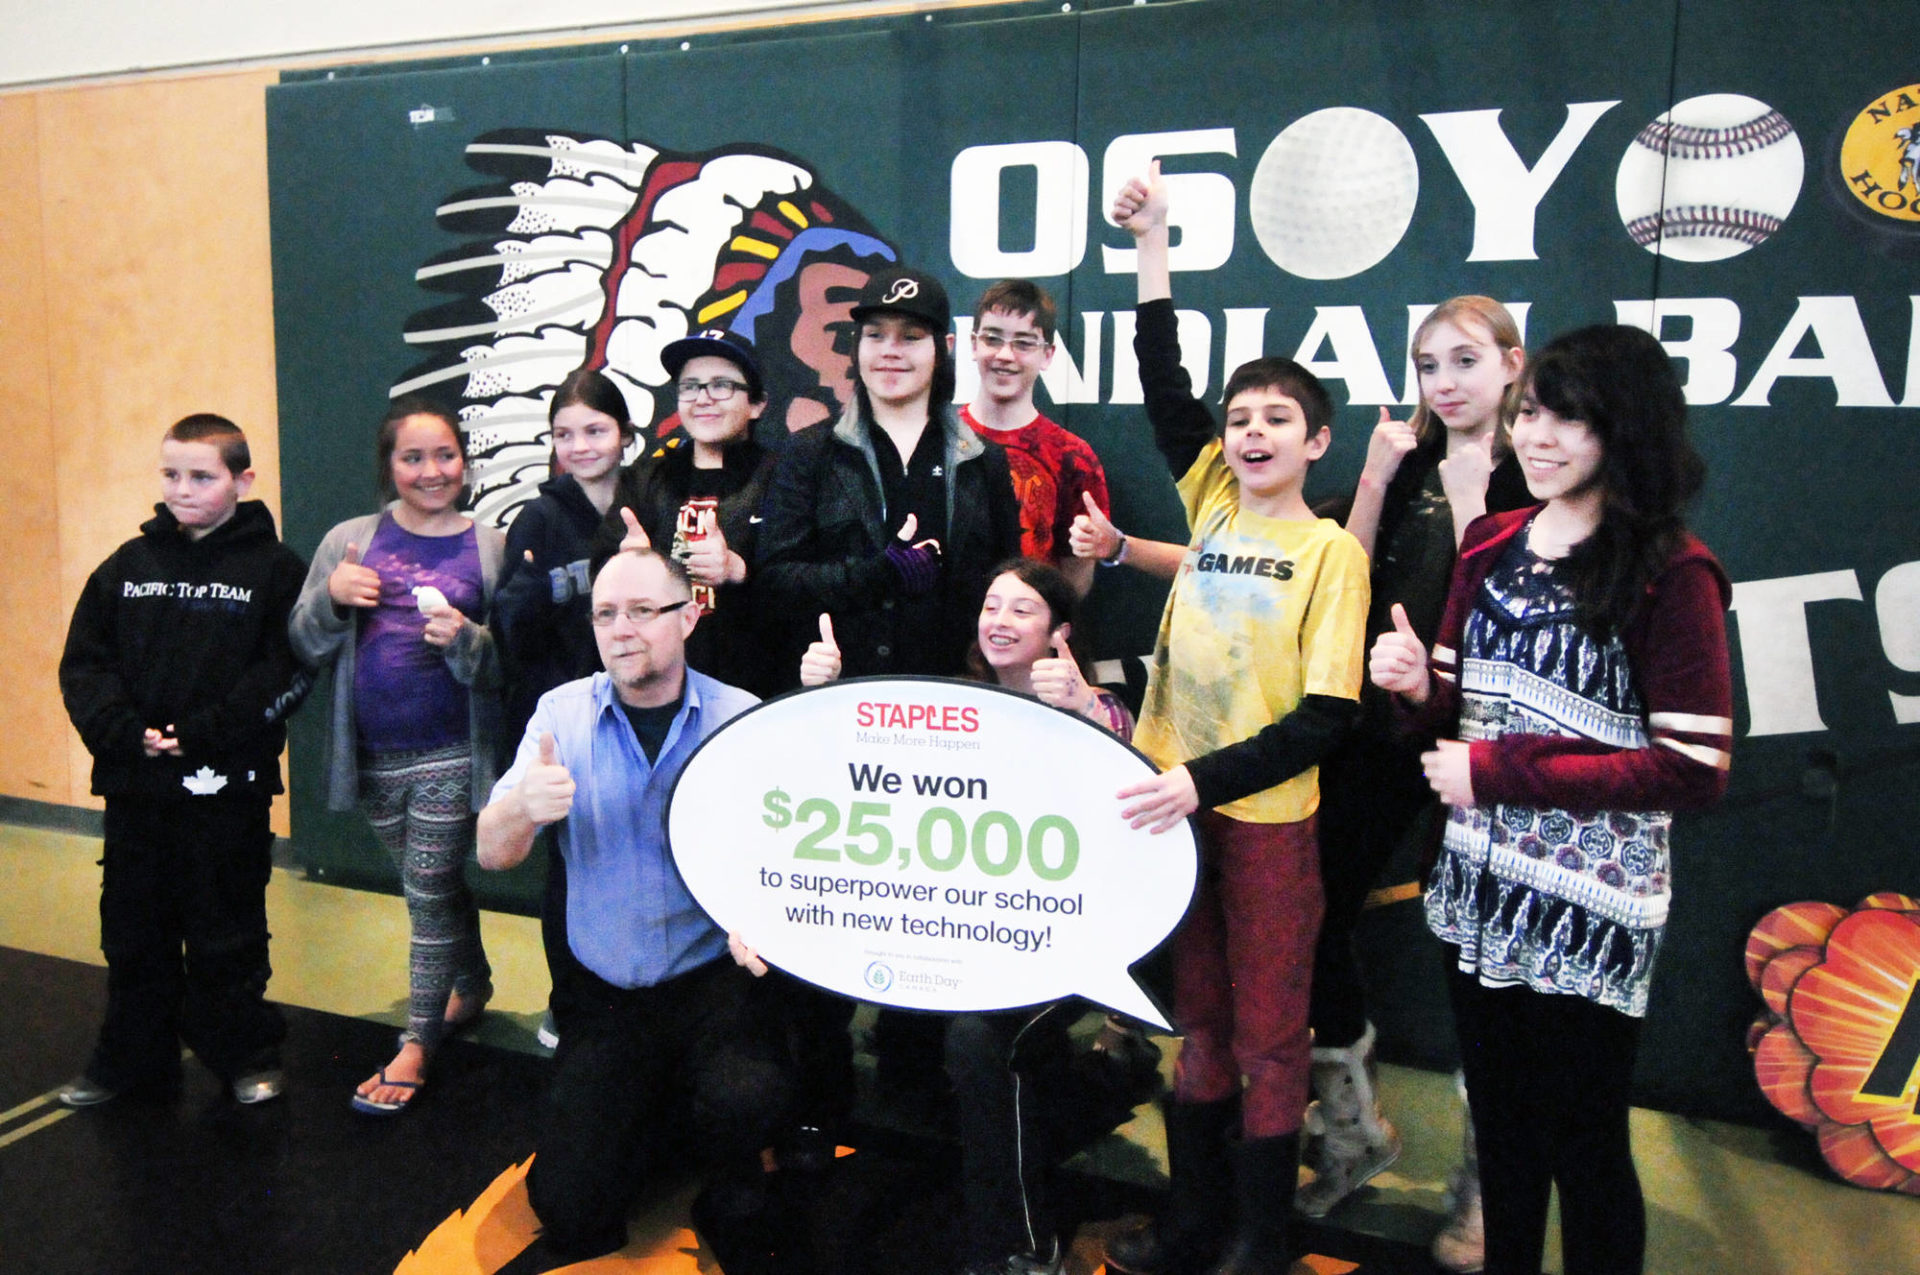 Oliver school celebrates one year after winning $25,000